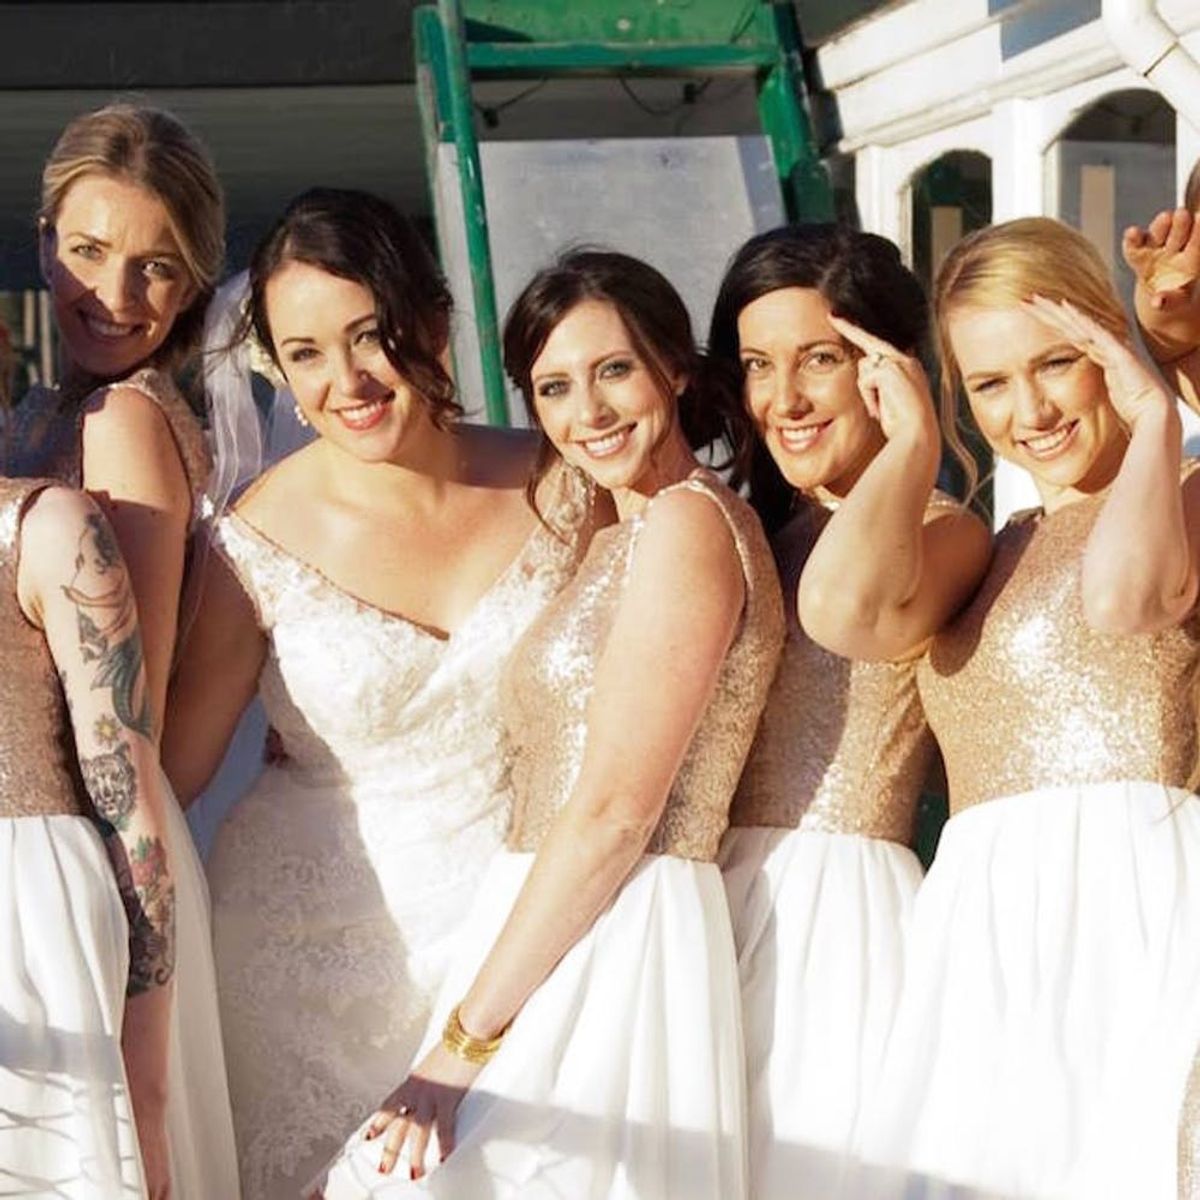 10 Tips on How to Be the Coolest Bride Ever